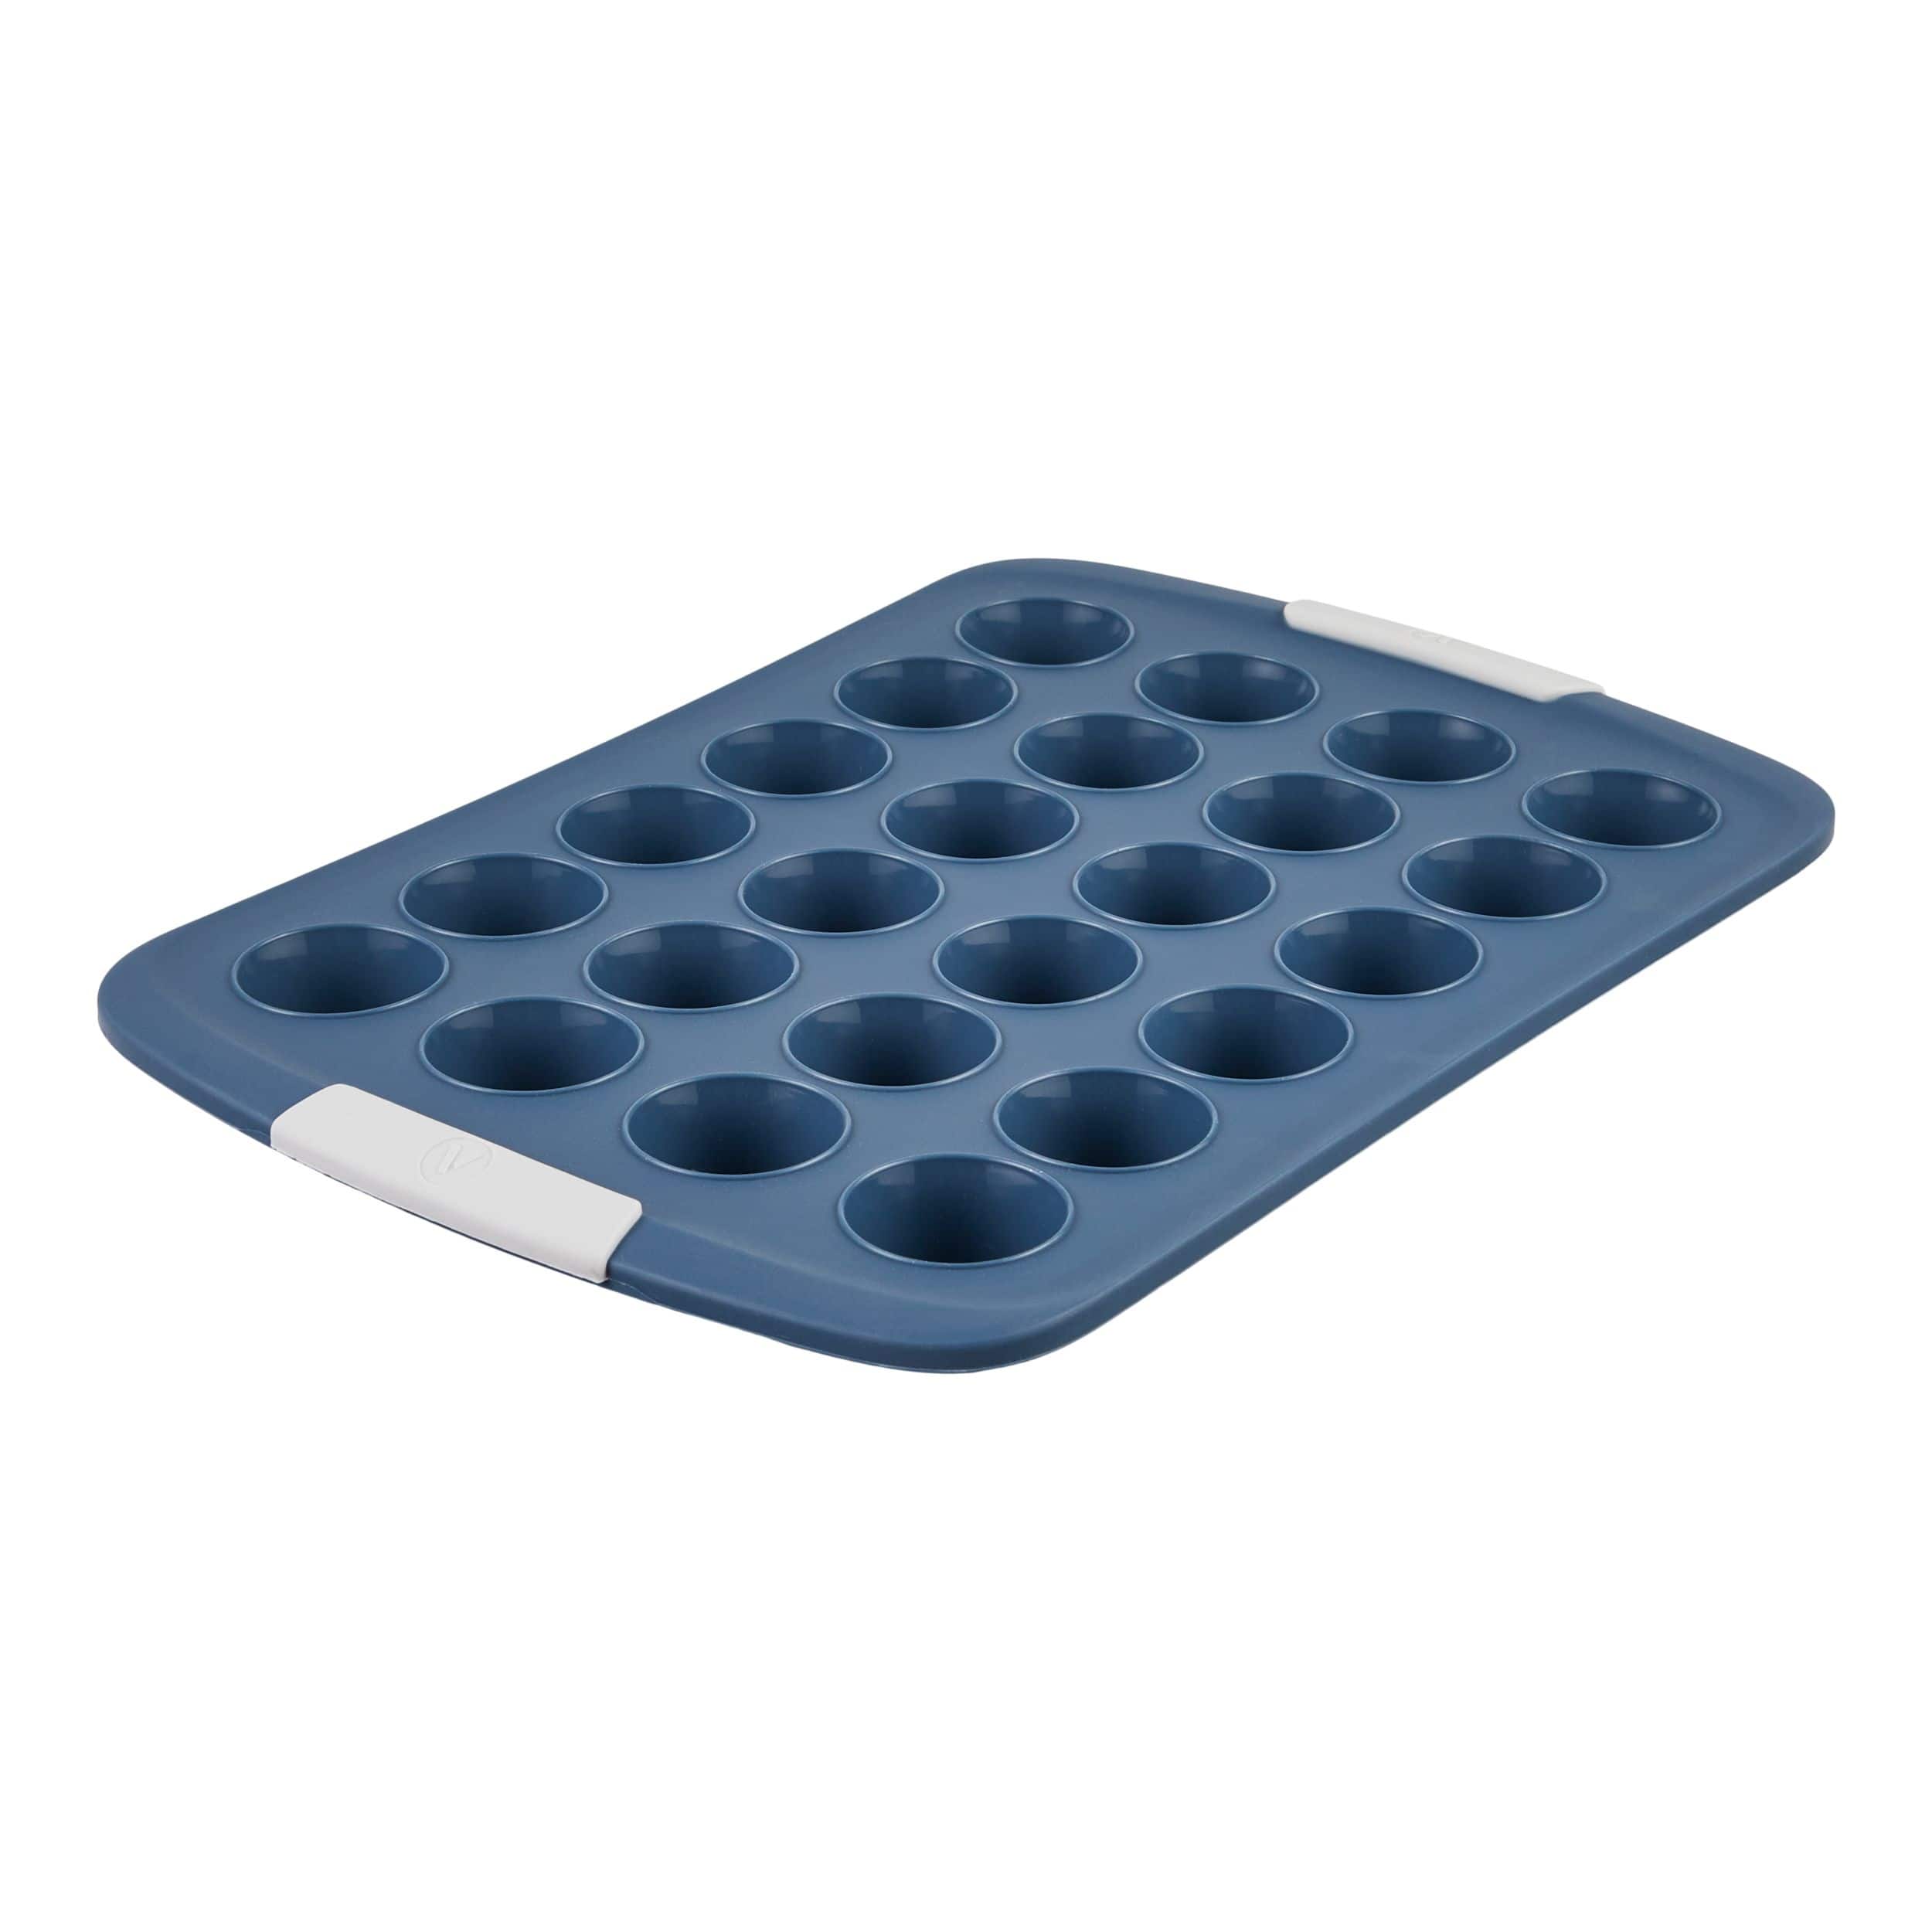 https://media-www.canadiantire.ca/product/living/kitchen/bakeware-baking-prep/1429690/vida-silicone-with-structure-mini-muffin-pan-7be11c75-c0ce-4d38-9d7a-393c0dc7775c-jpgrendition.jpg